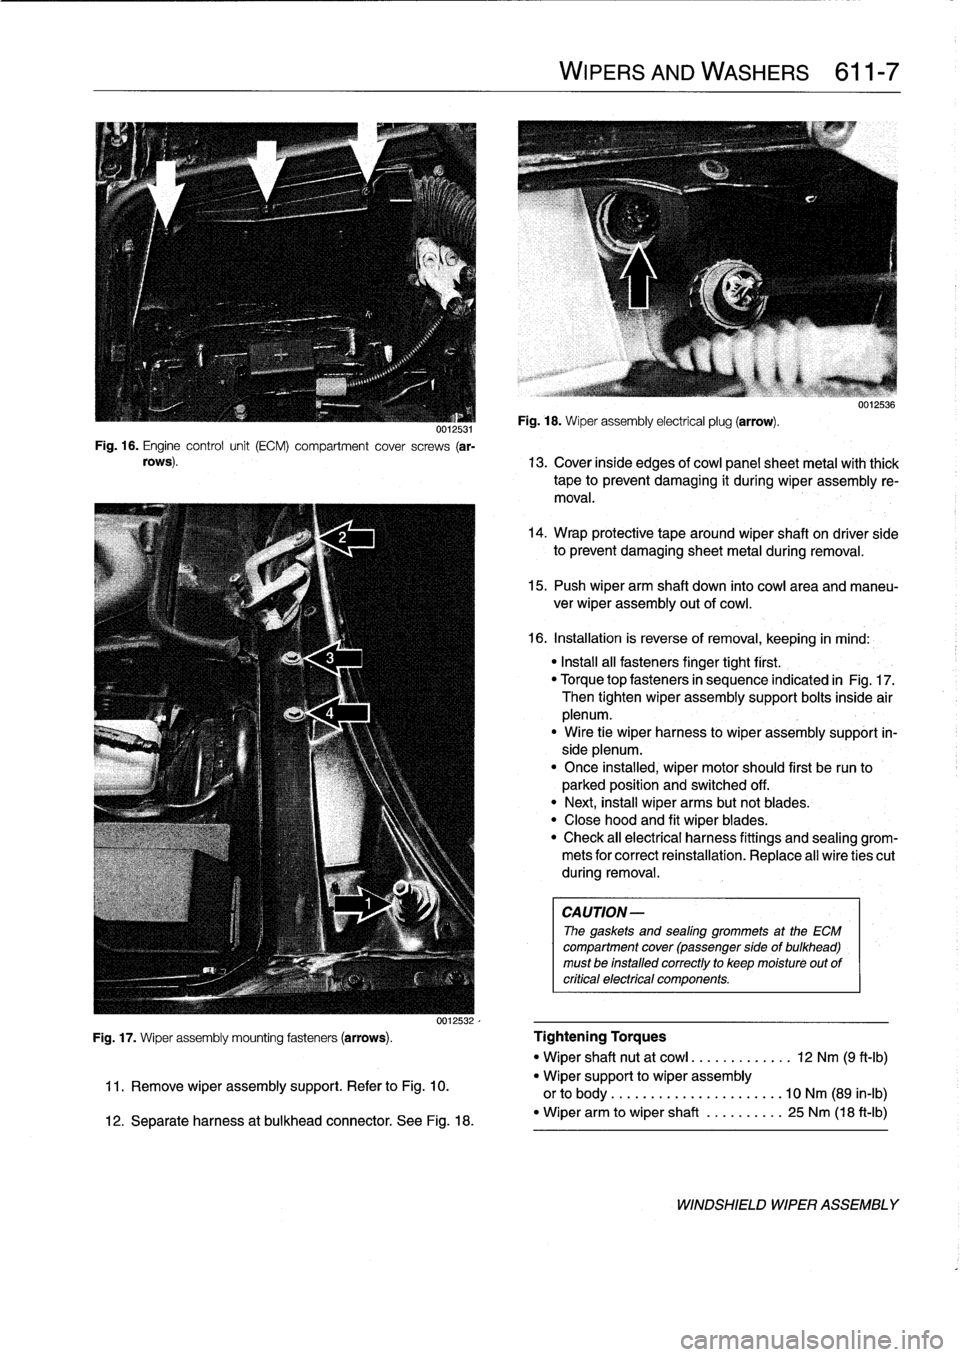 BMW 318i 1996 E36 Workshop Manual 
0012531Fig
.
16
.
Engine
control
unit
(ECM)
compartment
cover
screws
(ar-
rows)
.

WIPERS
AND
WASHERS

	

611-
7

Fig
.
18
.
Wiper
assembly
electrical
plug
(arrow)
.

uu1zbs6

13
.
Cover
inside
edges